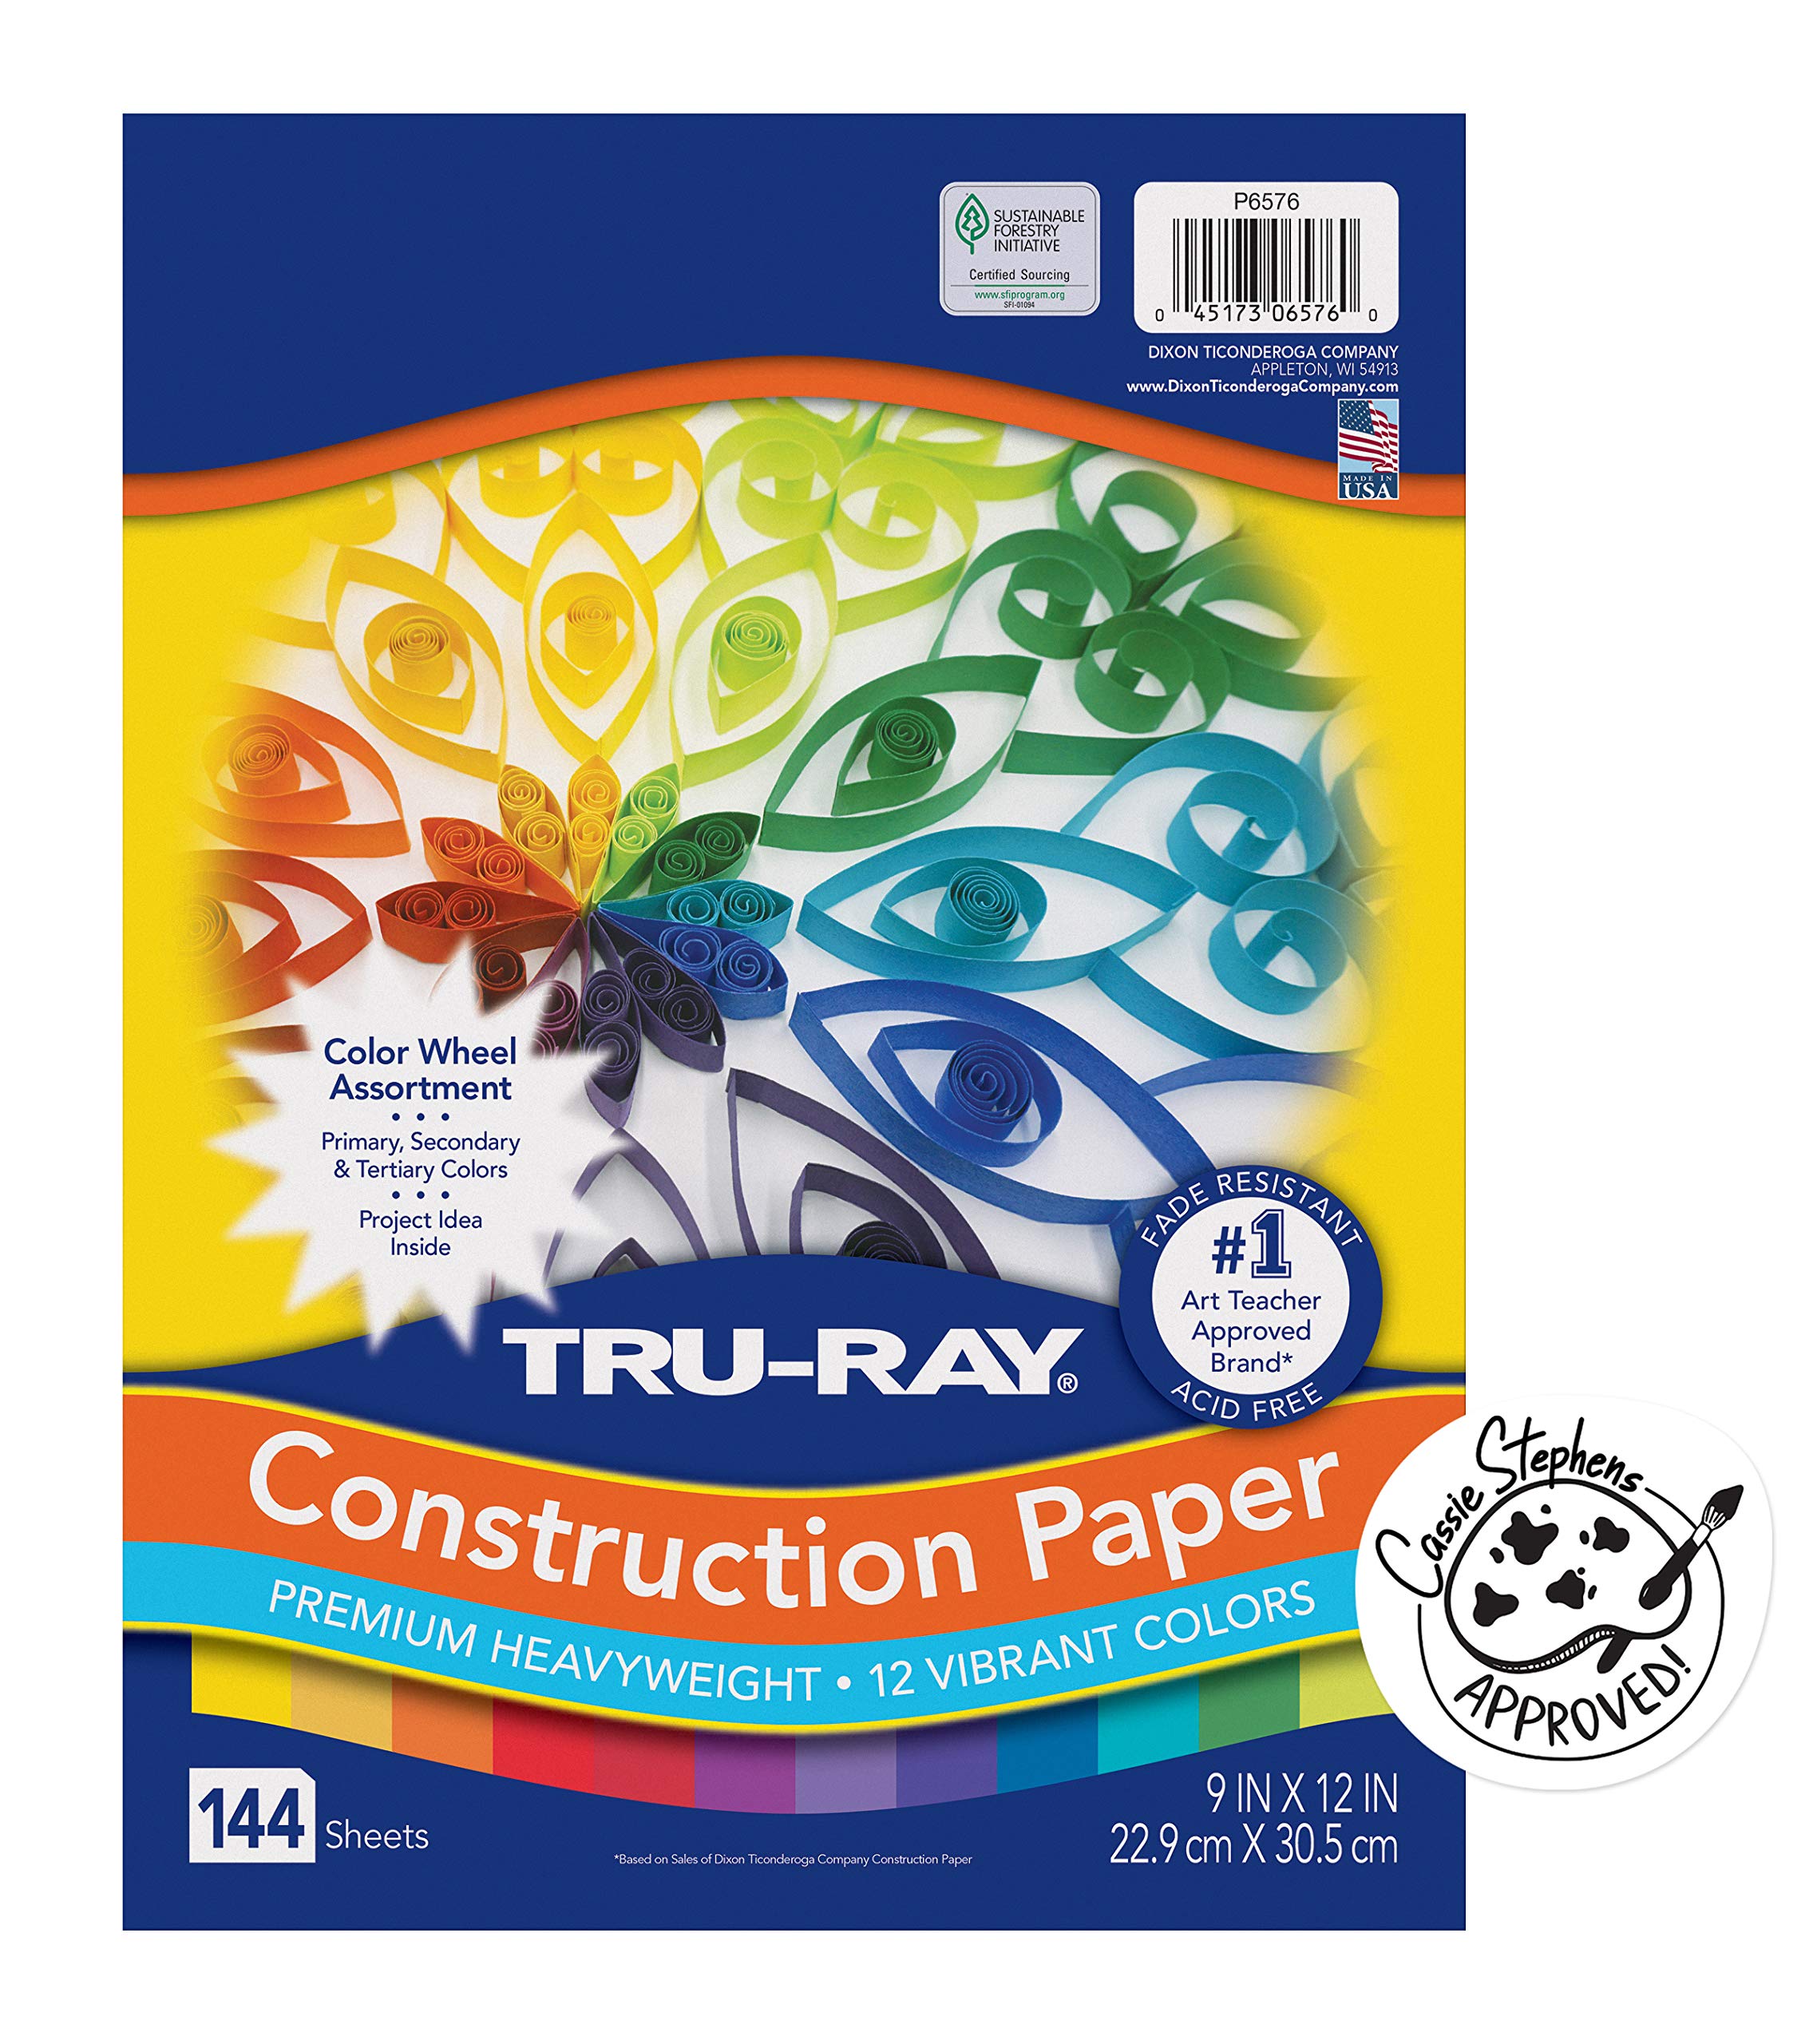 Tru-Ray Sulphite Construction Paper, 12 x 18 Inches, Primary Colors, 50 Sheets